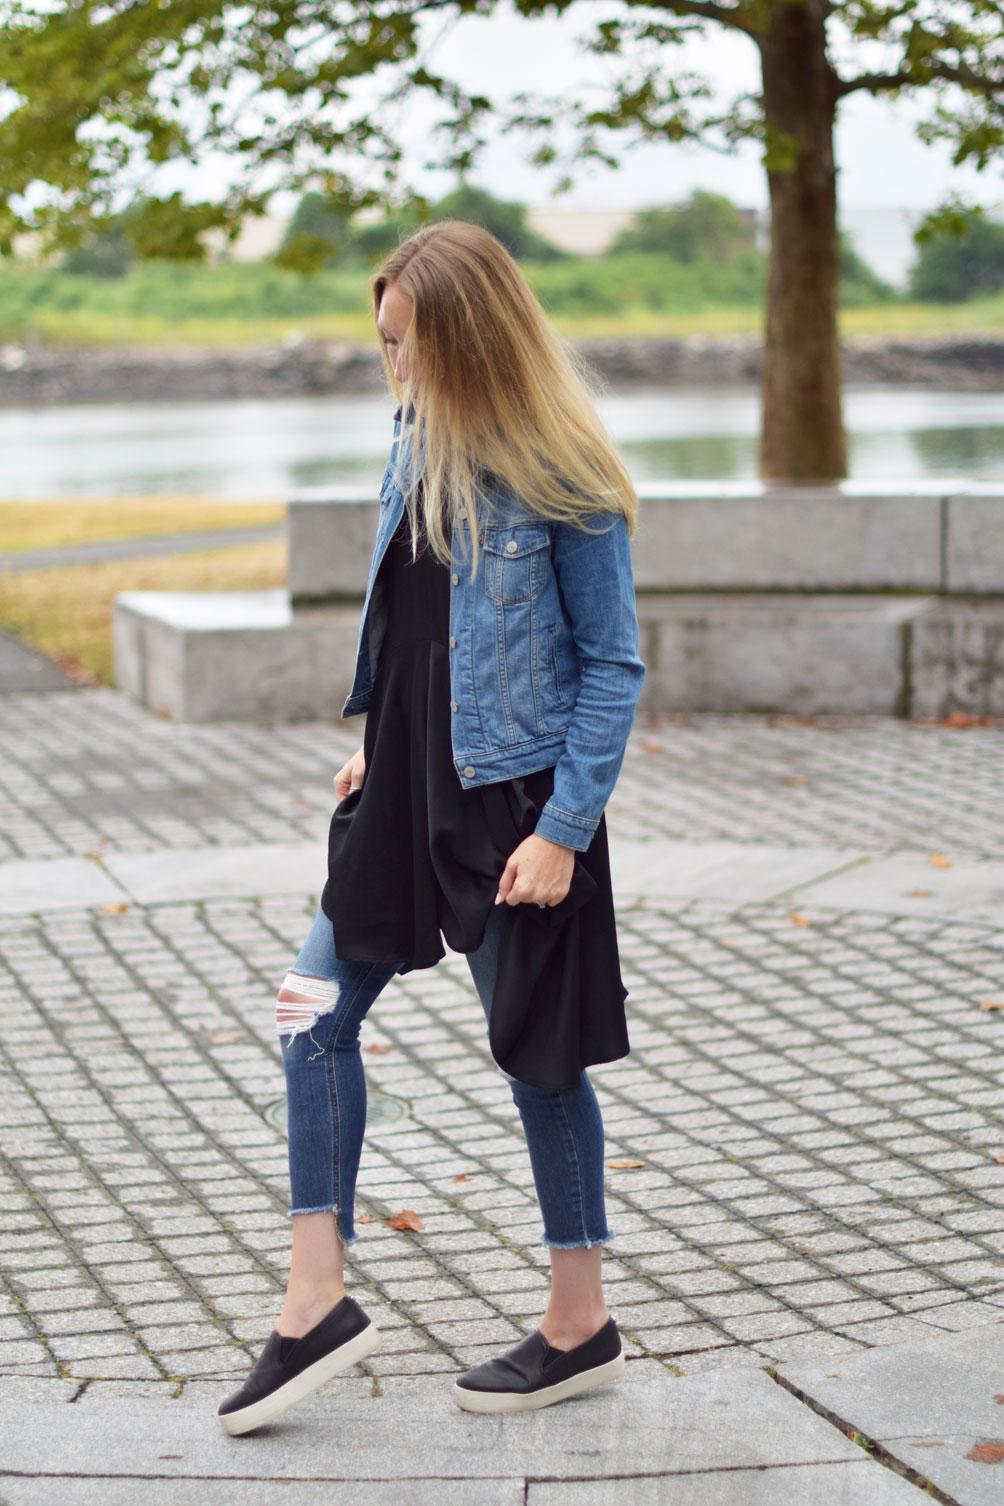 early fall style inspiration from fashion blogger Leslie Musser of one brass fox with distressed layered denim and a swing dress